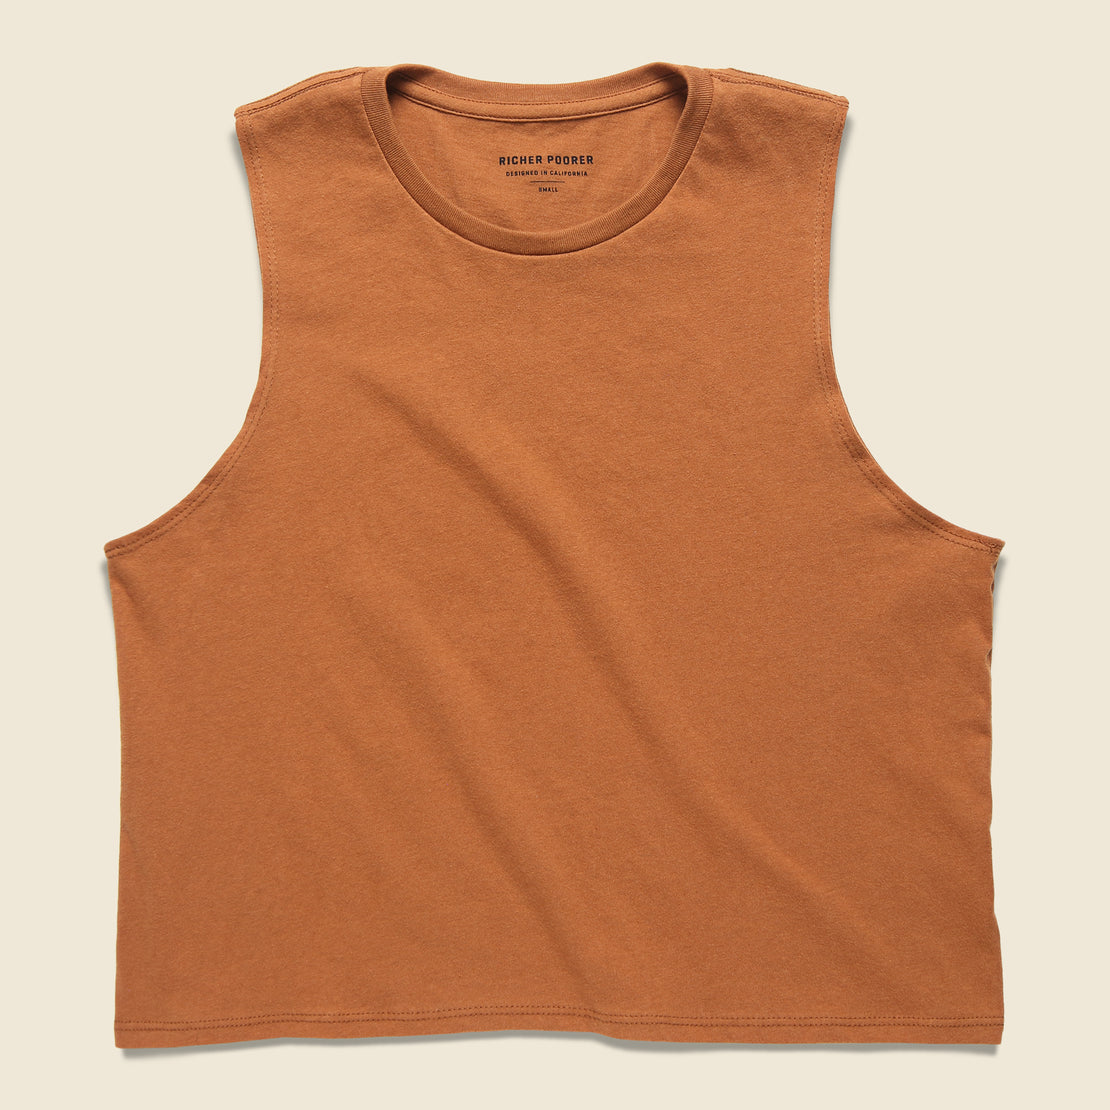 Richer Poorer Cropped Muscle Tank - Tobacco